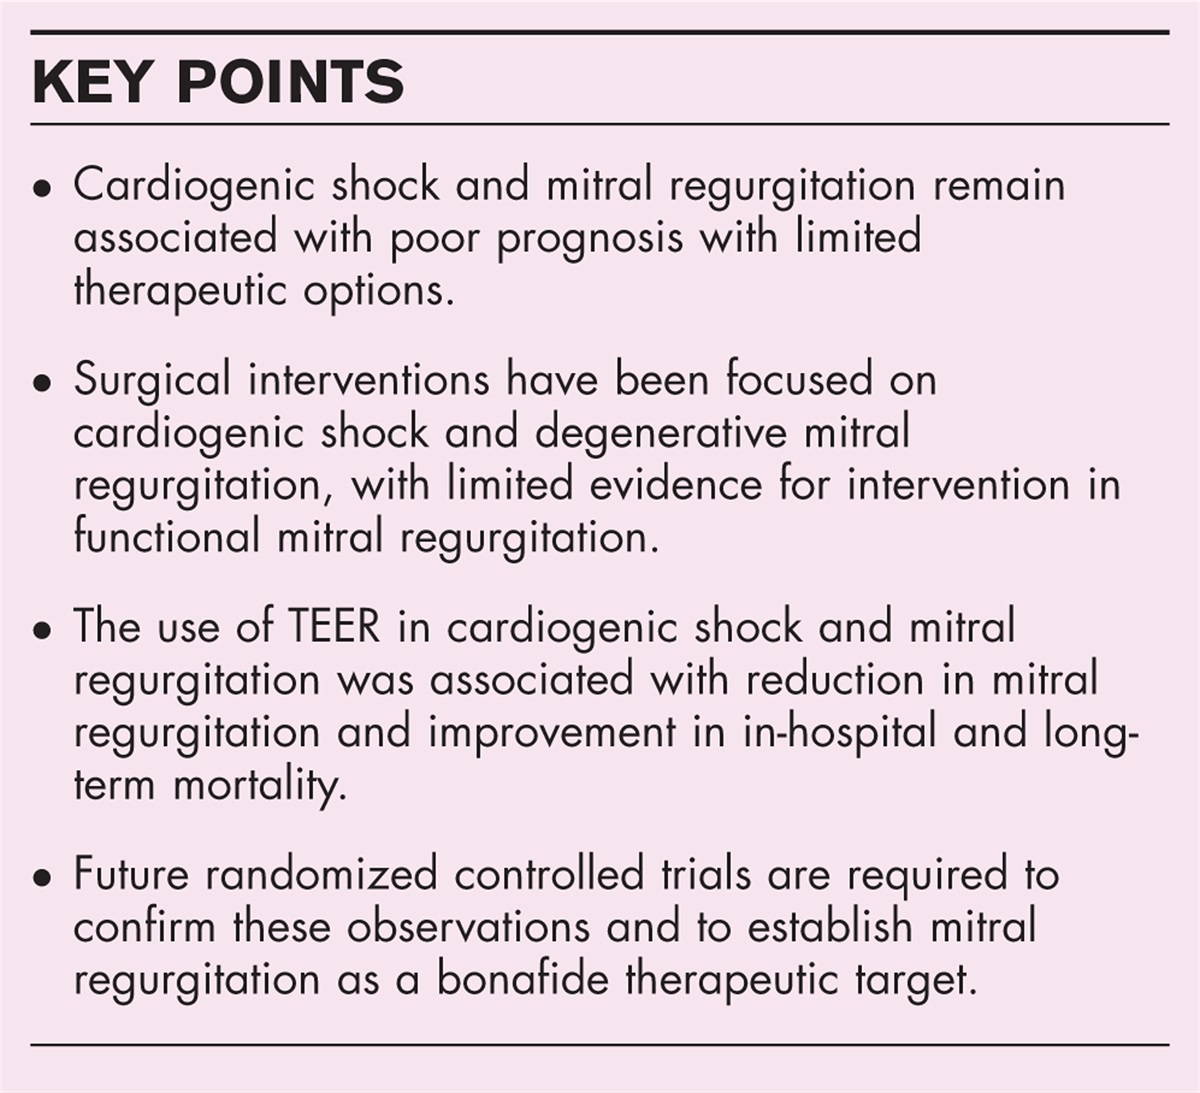 Transcatheter edge-to-edge repair in patients with mitral regurgitation and cardiogenic shock: a new therapeutic target